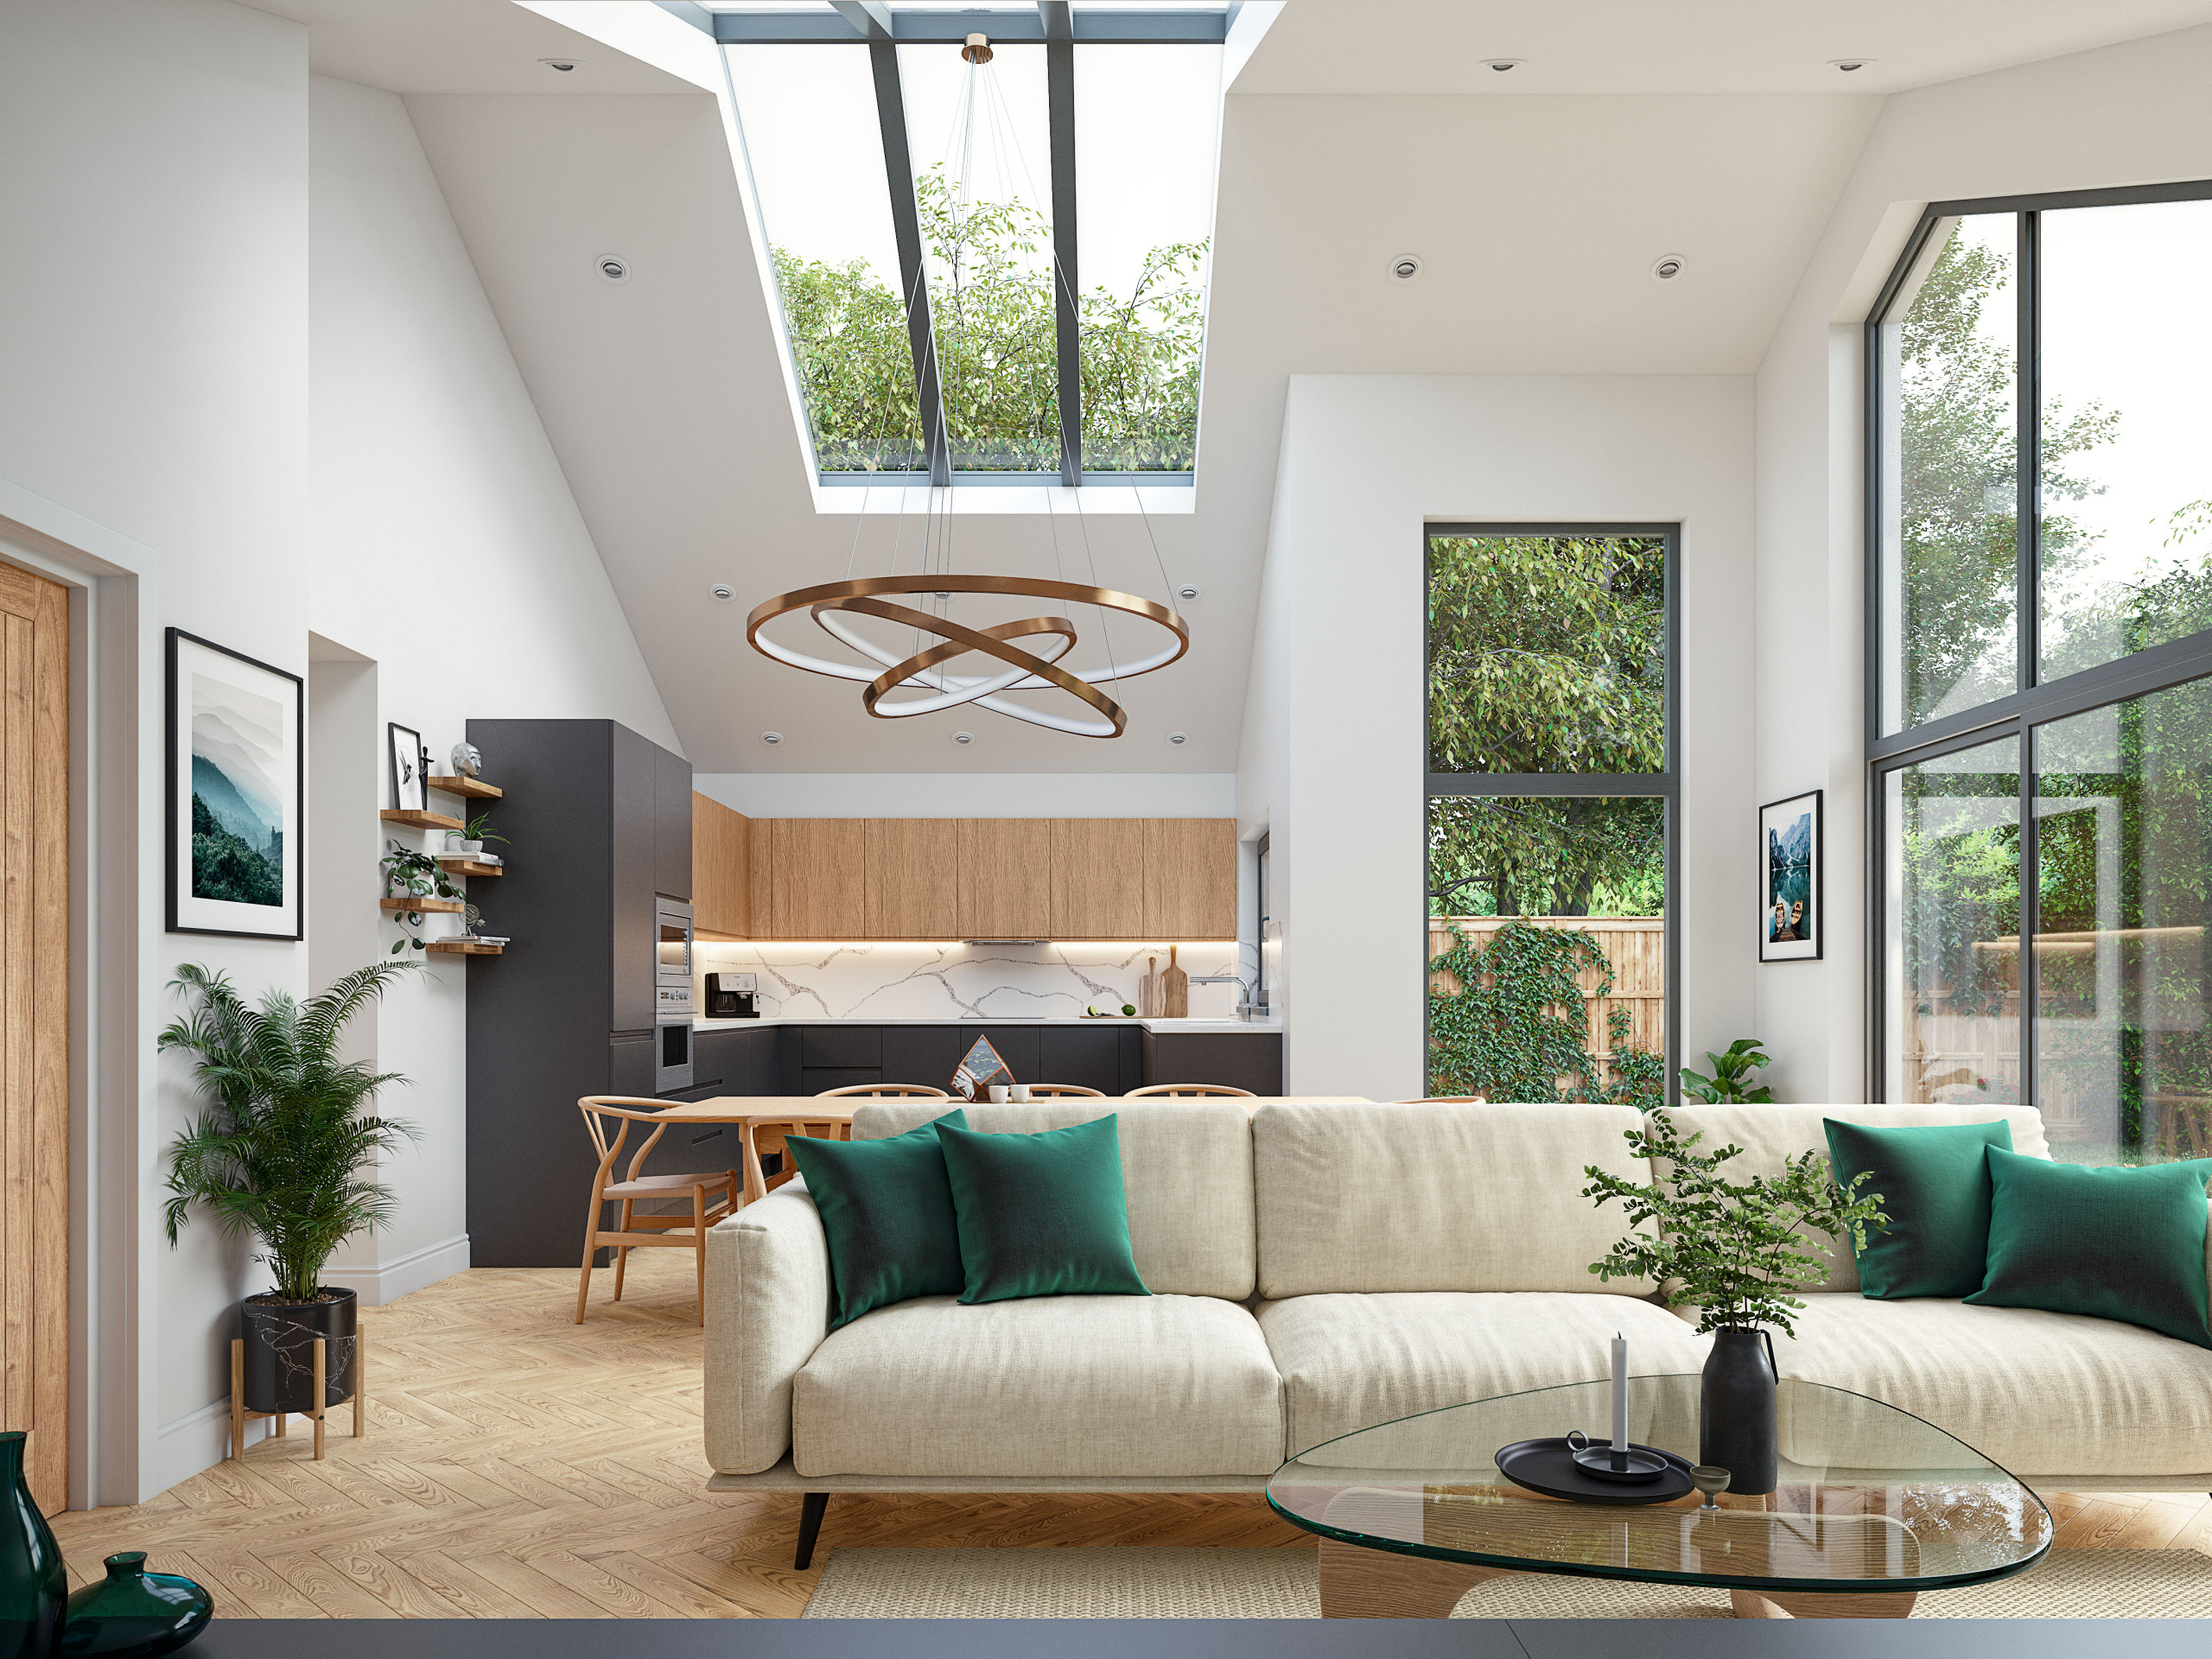 View of open-plan living space